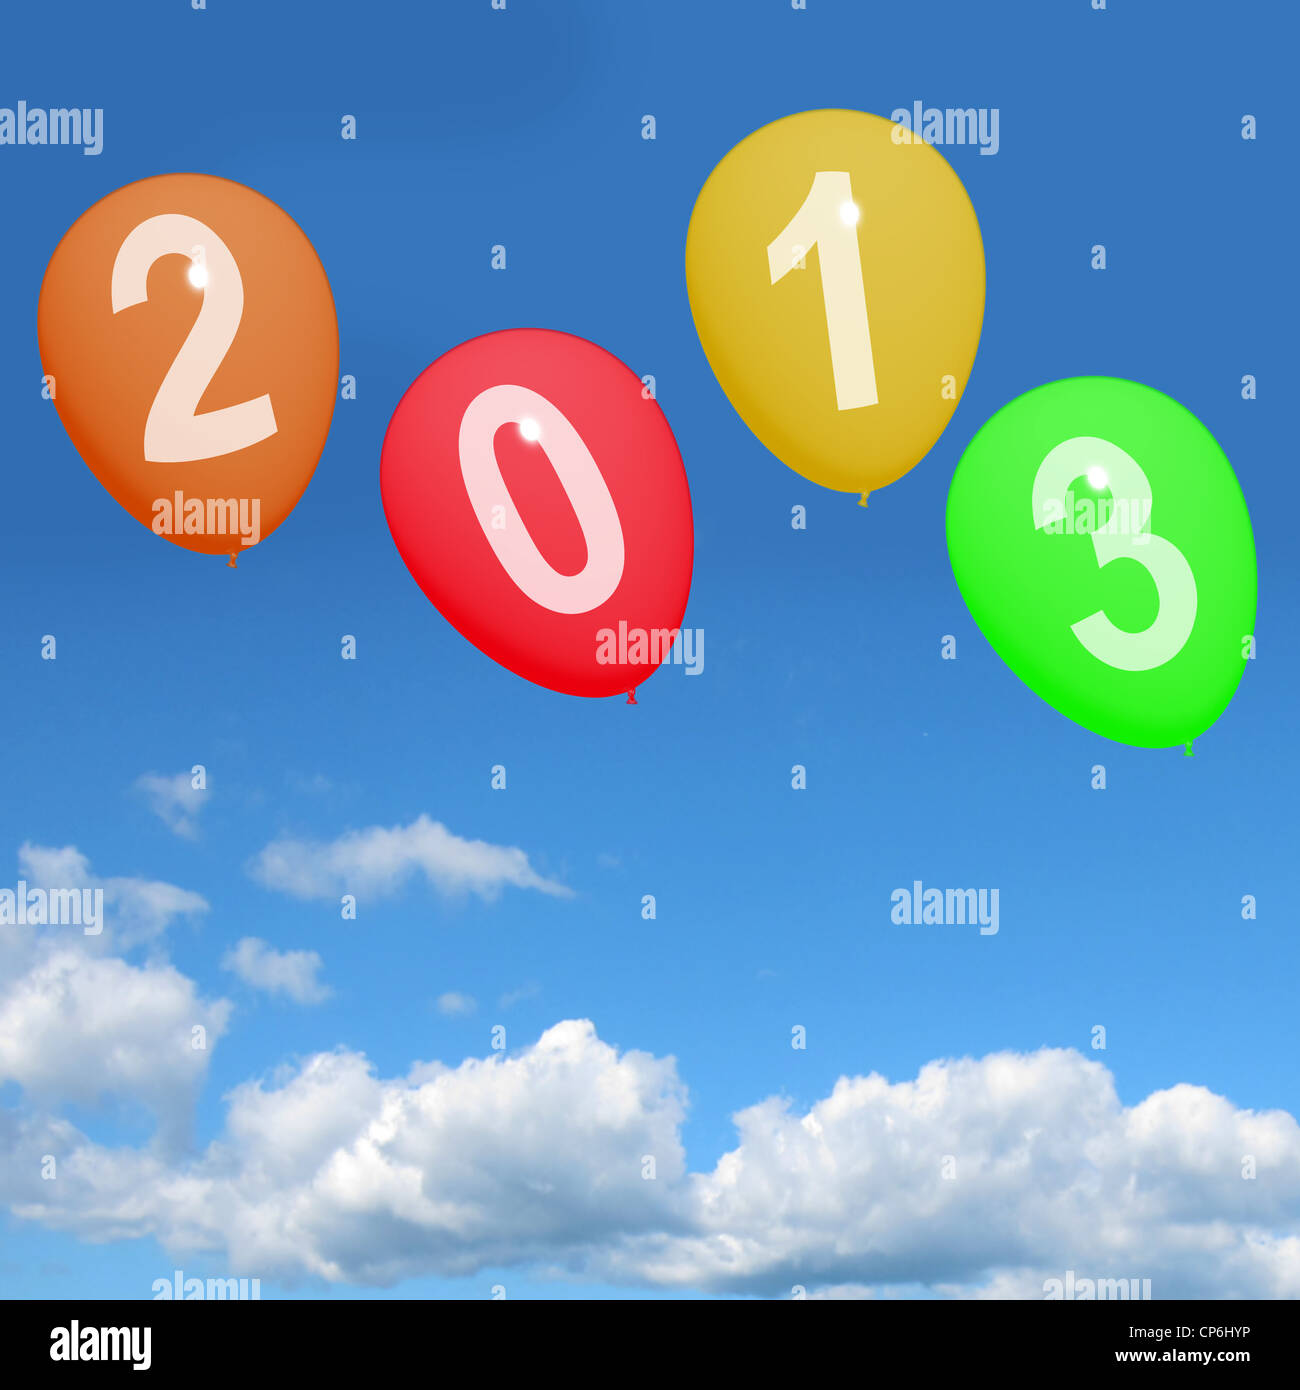 2013 Balloons In Sky Represents Year Two Thousand And Thirteen Stock Photo